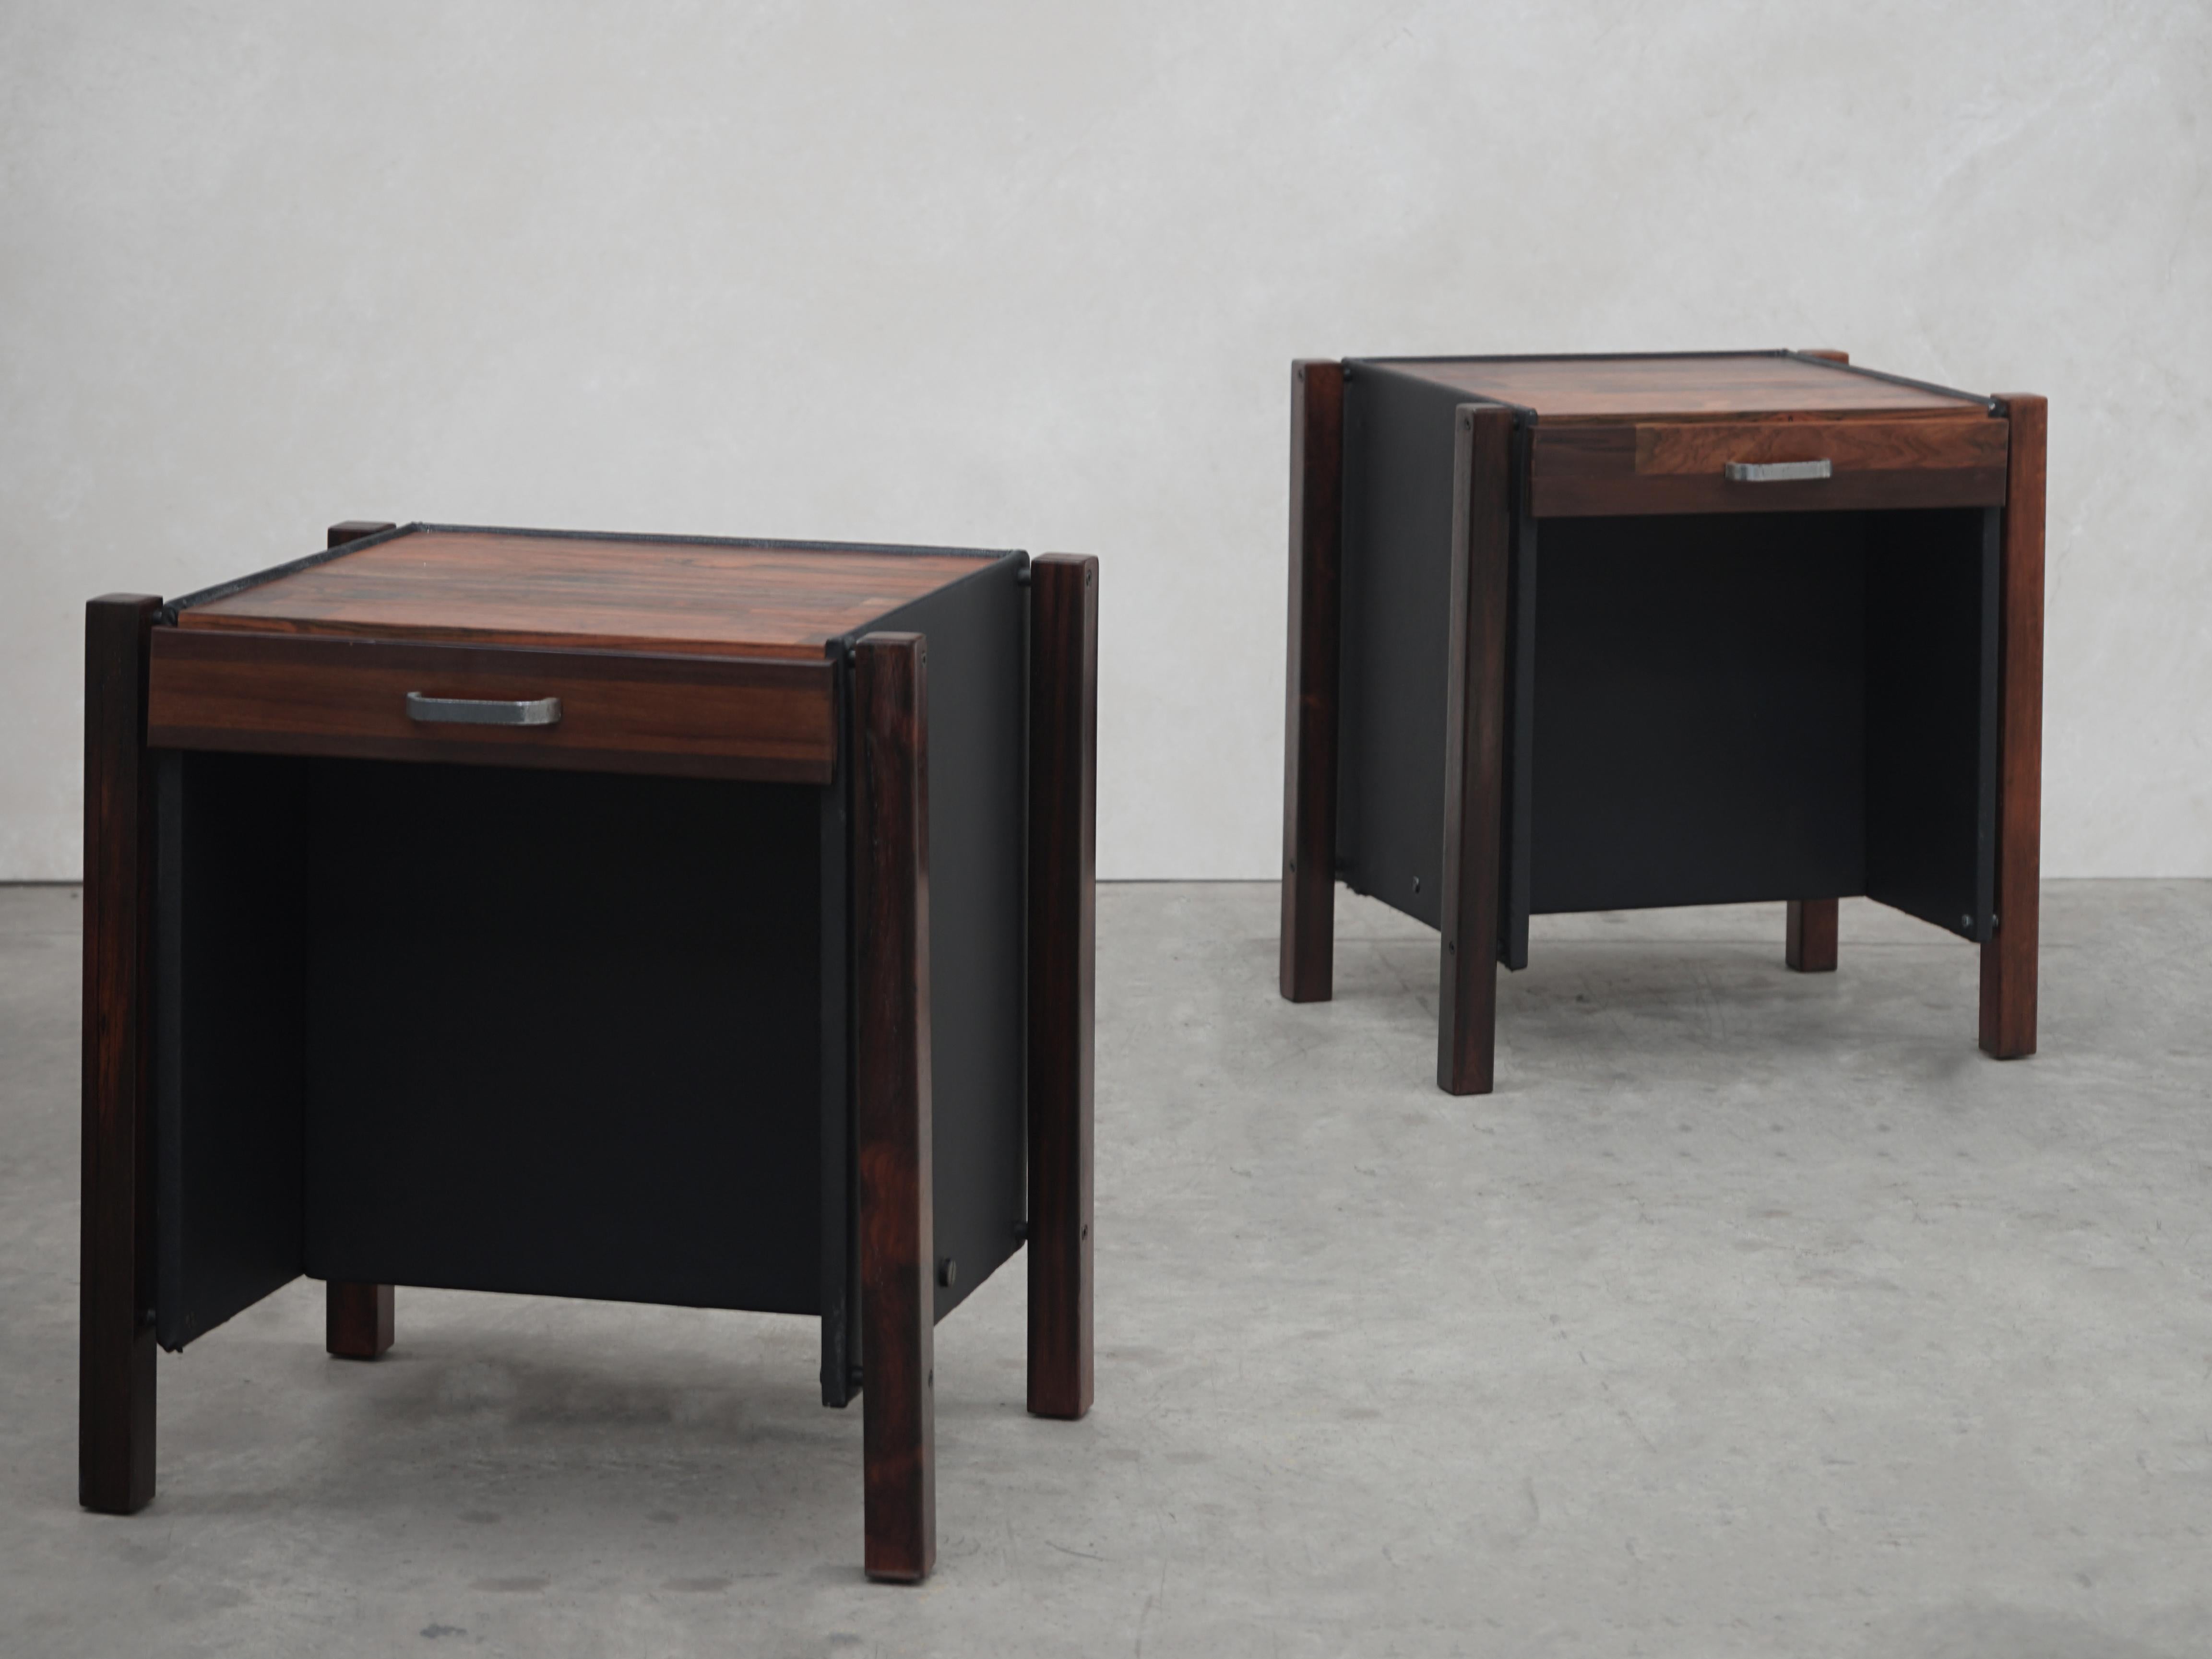 Pair of End Tables by Jorge Zalszupin, Brazilian Midcentury Design, 1960s For Sale 5